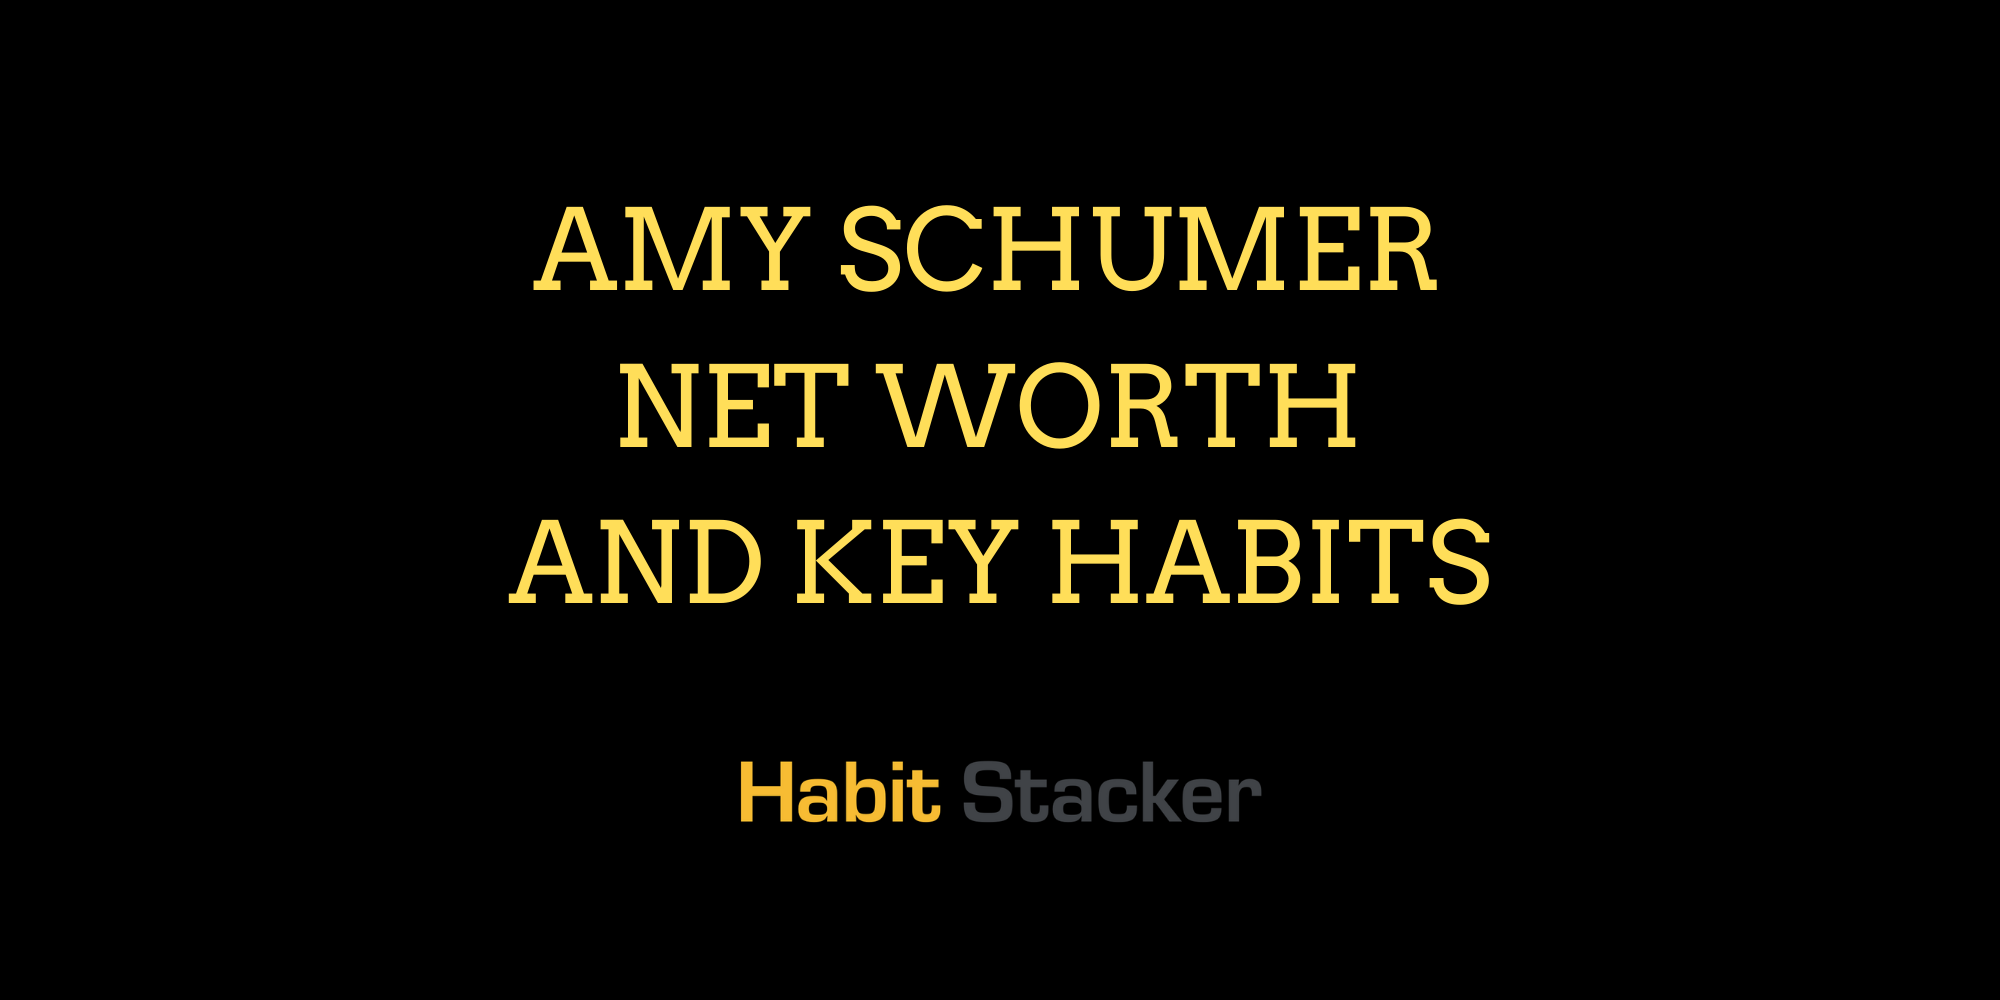 Amy Schumer Net Worth and Key Habits